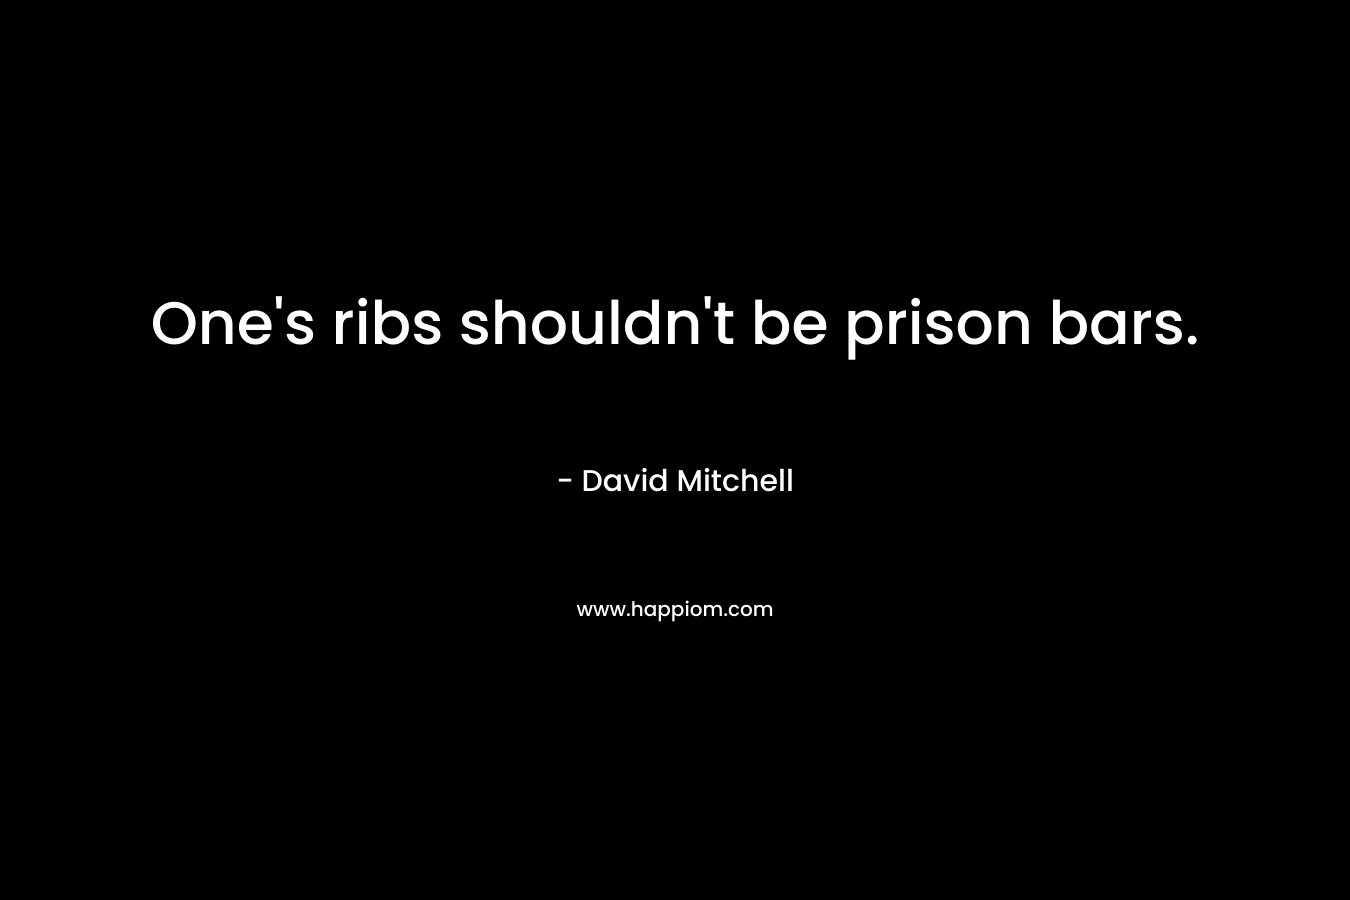 One's ribs shouldn't be prison bars.